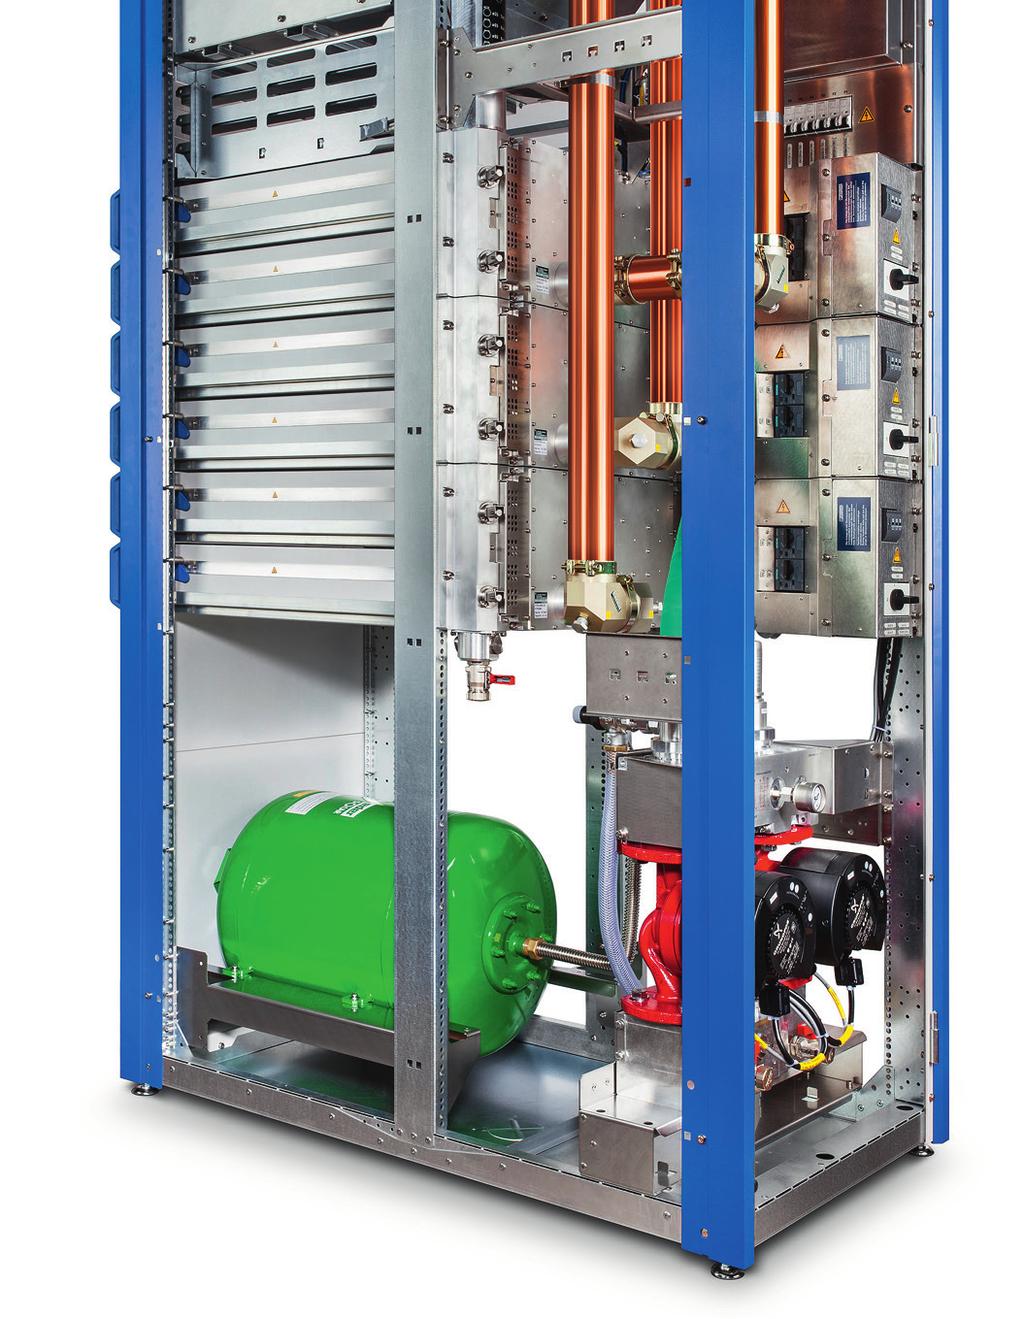 Highest power density with space for additional components MultiTX system with three 10 kw transmitters with integrated pump unit Integration of multiple transmitters and additional system components